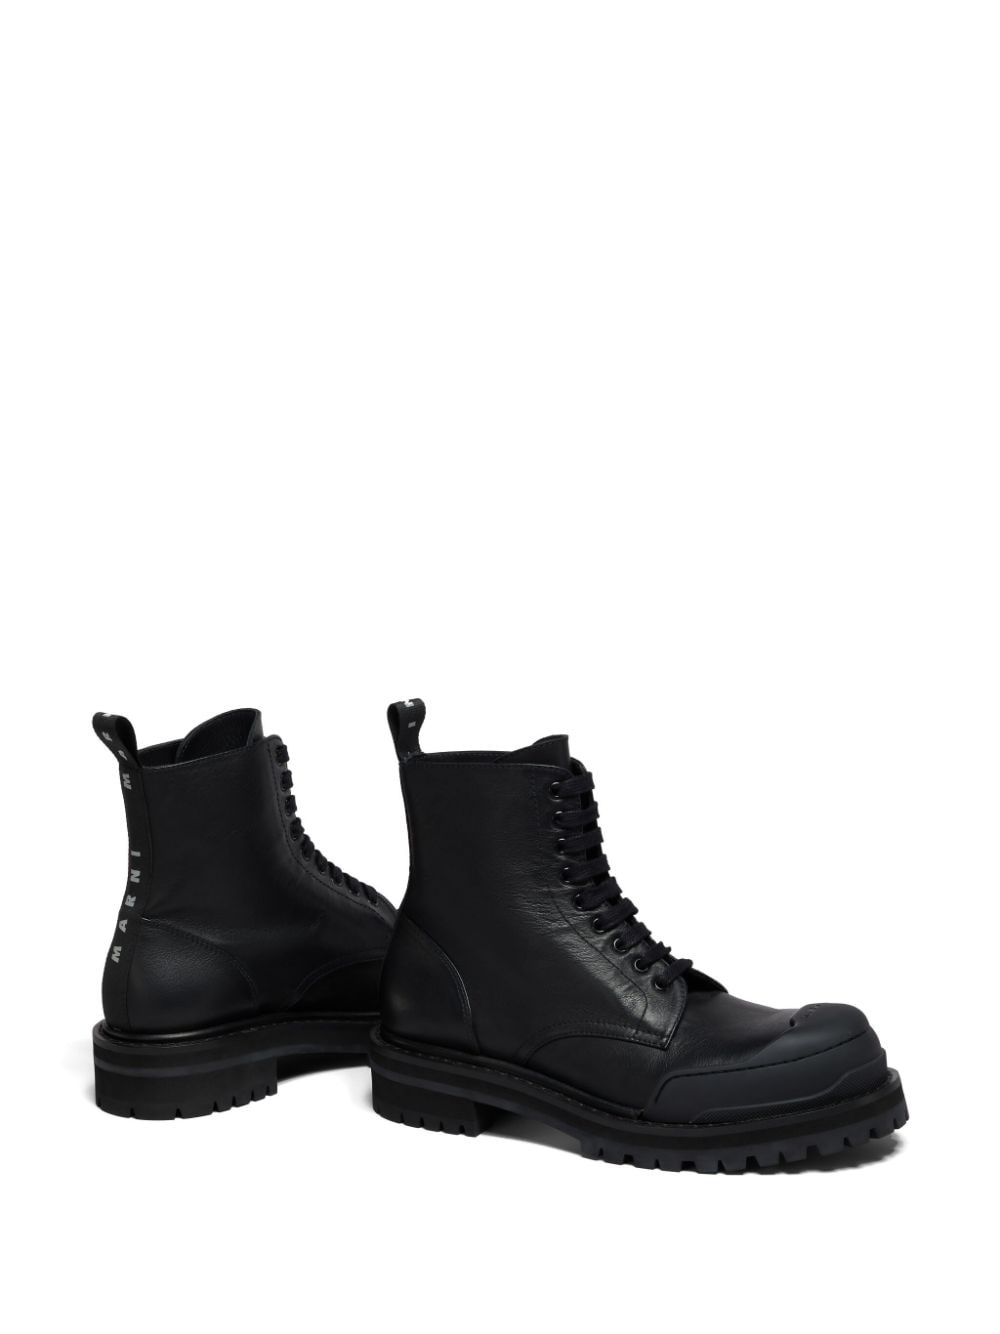 panelled toe combat boots - 4